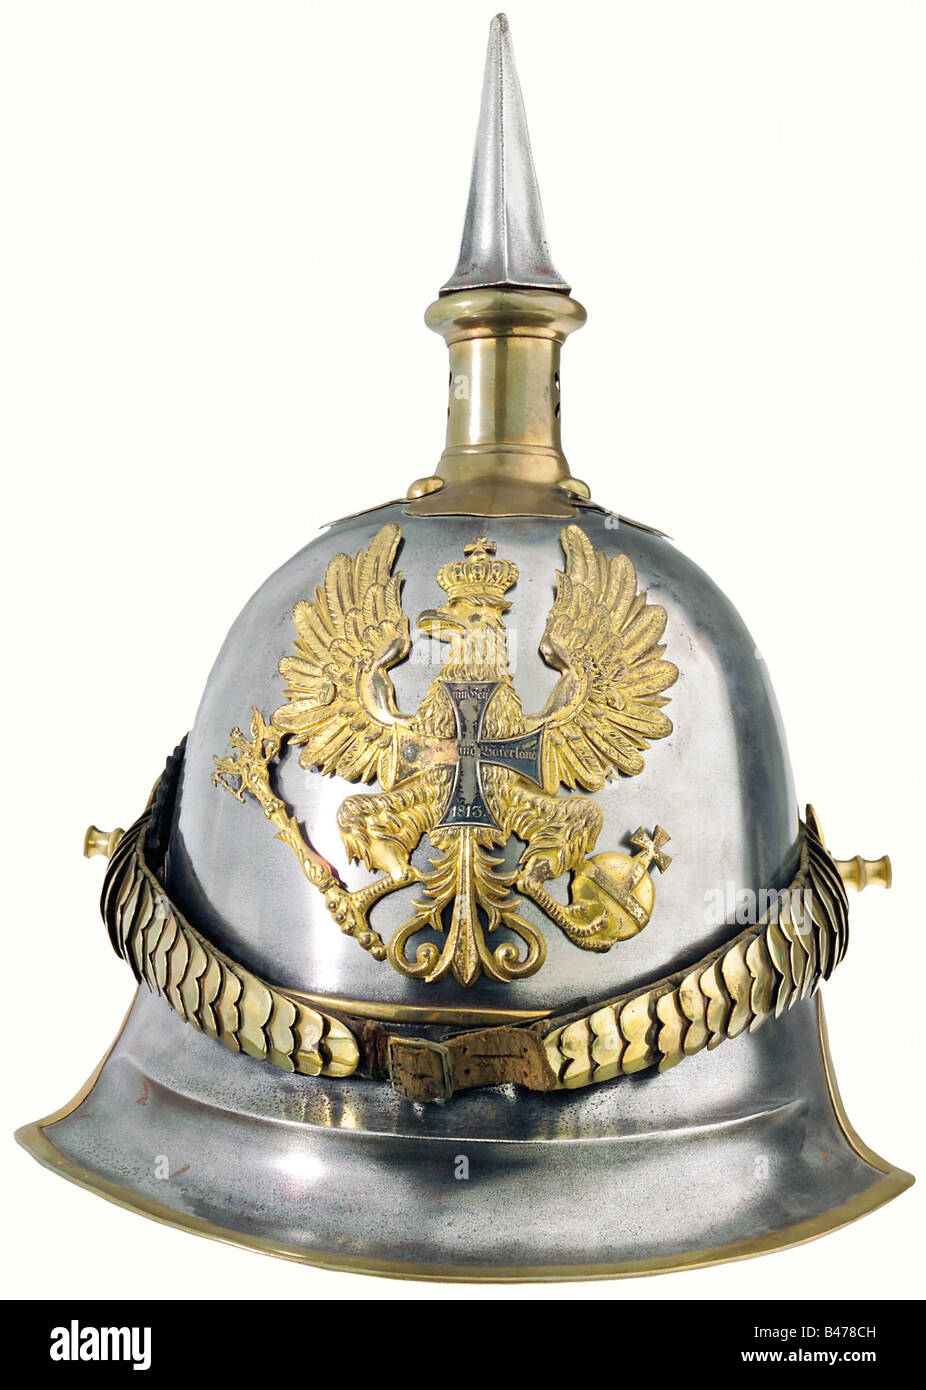 Prussia: A helmet for reserve officers, of cuirassiers, 1843 pattern. Brass-rimmed steel bowl with brass fittings. Gilt plate, slightly polish worn, with a superimposed reserve cross (with one of its arms missing). The attachment screws are old, but not original. Cambered chinscales, attached by long replacement stud bolts. Of the trefoil rosettes, one is original, the other a modern replacement. A leather officer's cockade on the right. The underside of the visor has a recent lacquer finish. The lining is of red leather, worn with age on the underside of the n, Stock Photo